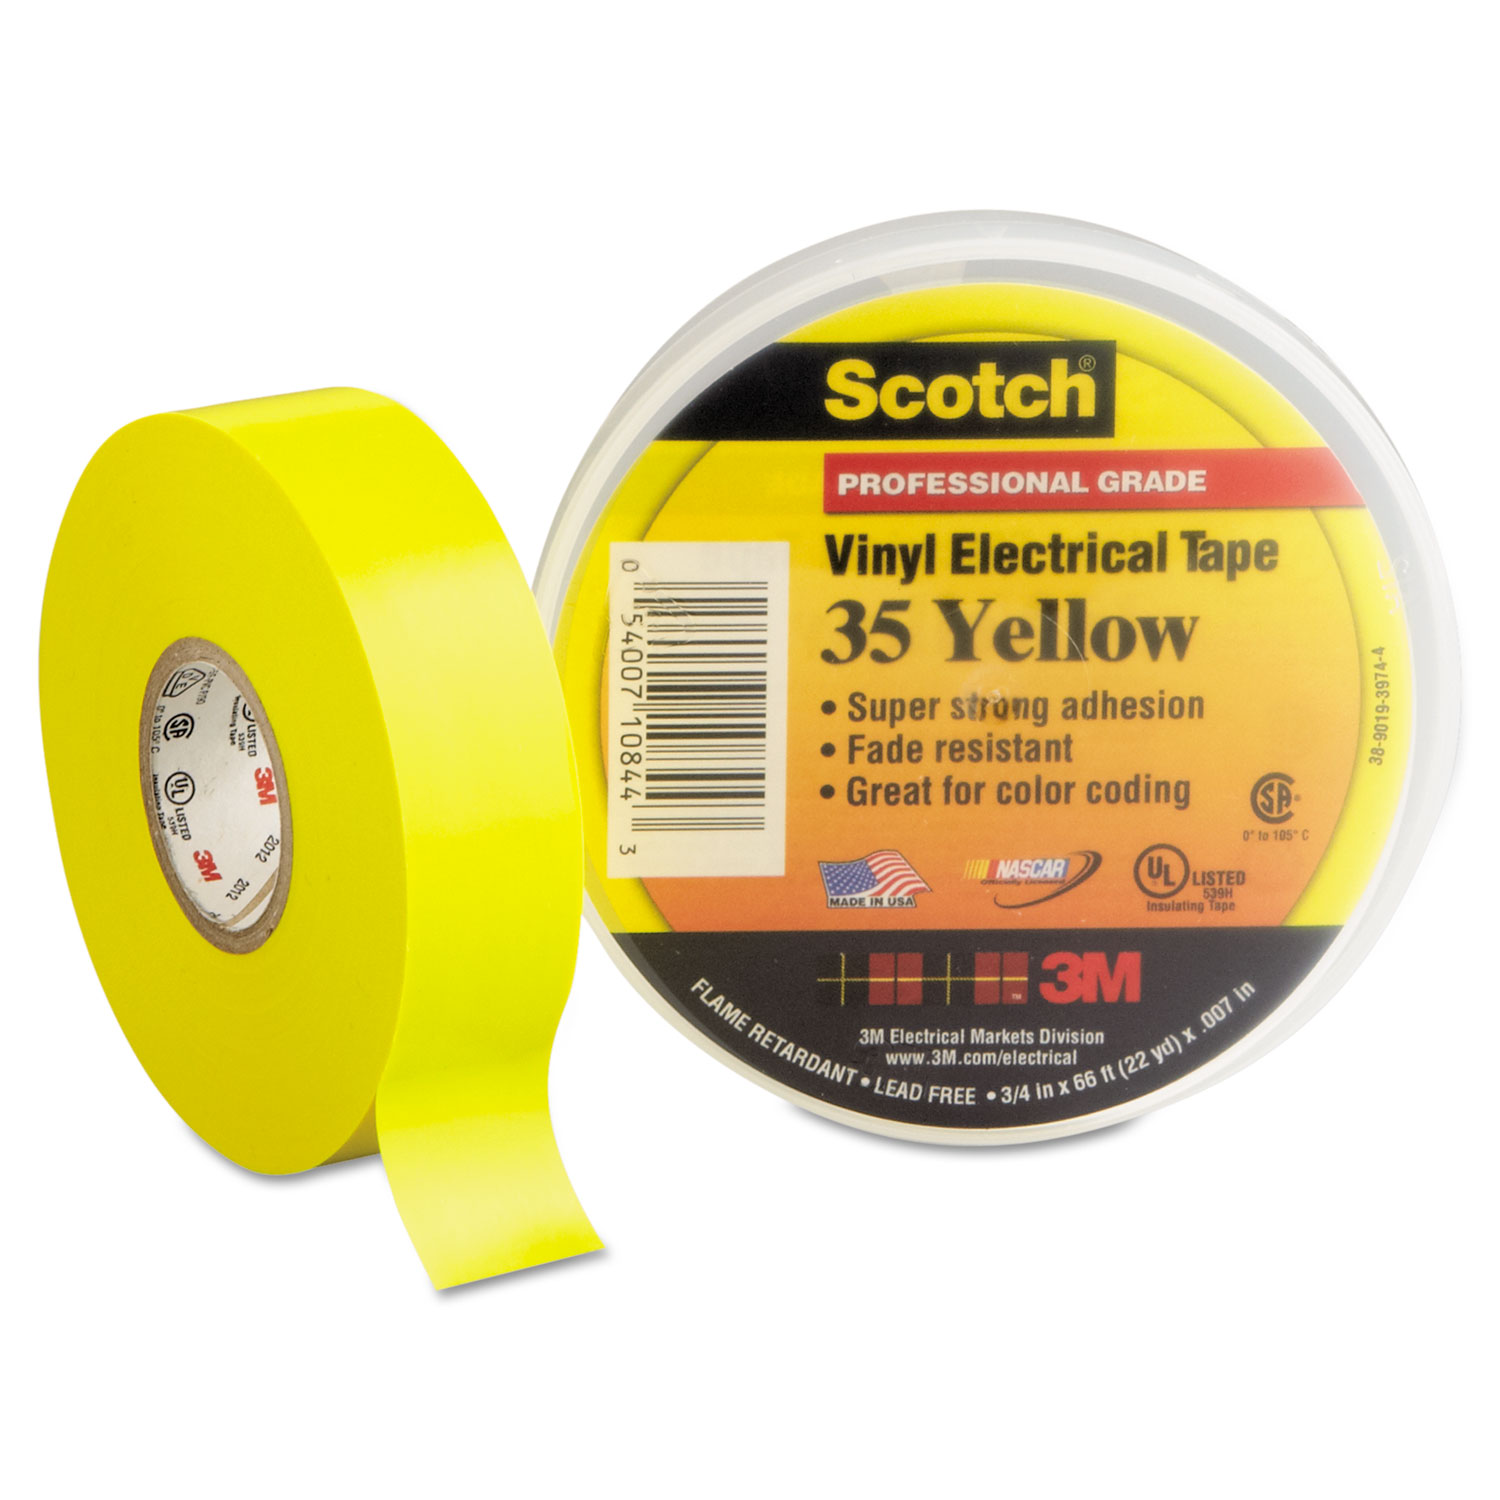 Scotch 35 Vinyl Electrical Color Coding Tape, 3/4 x 66ft, Yellow